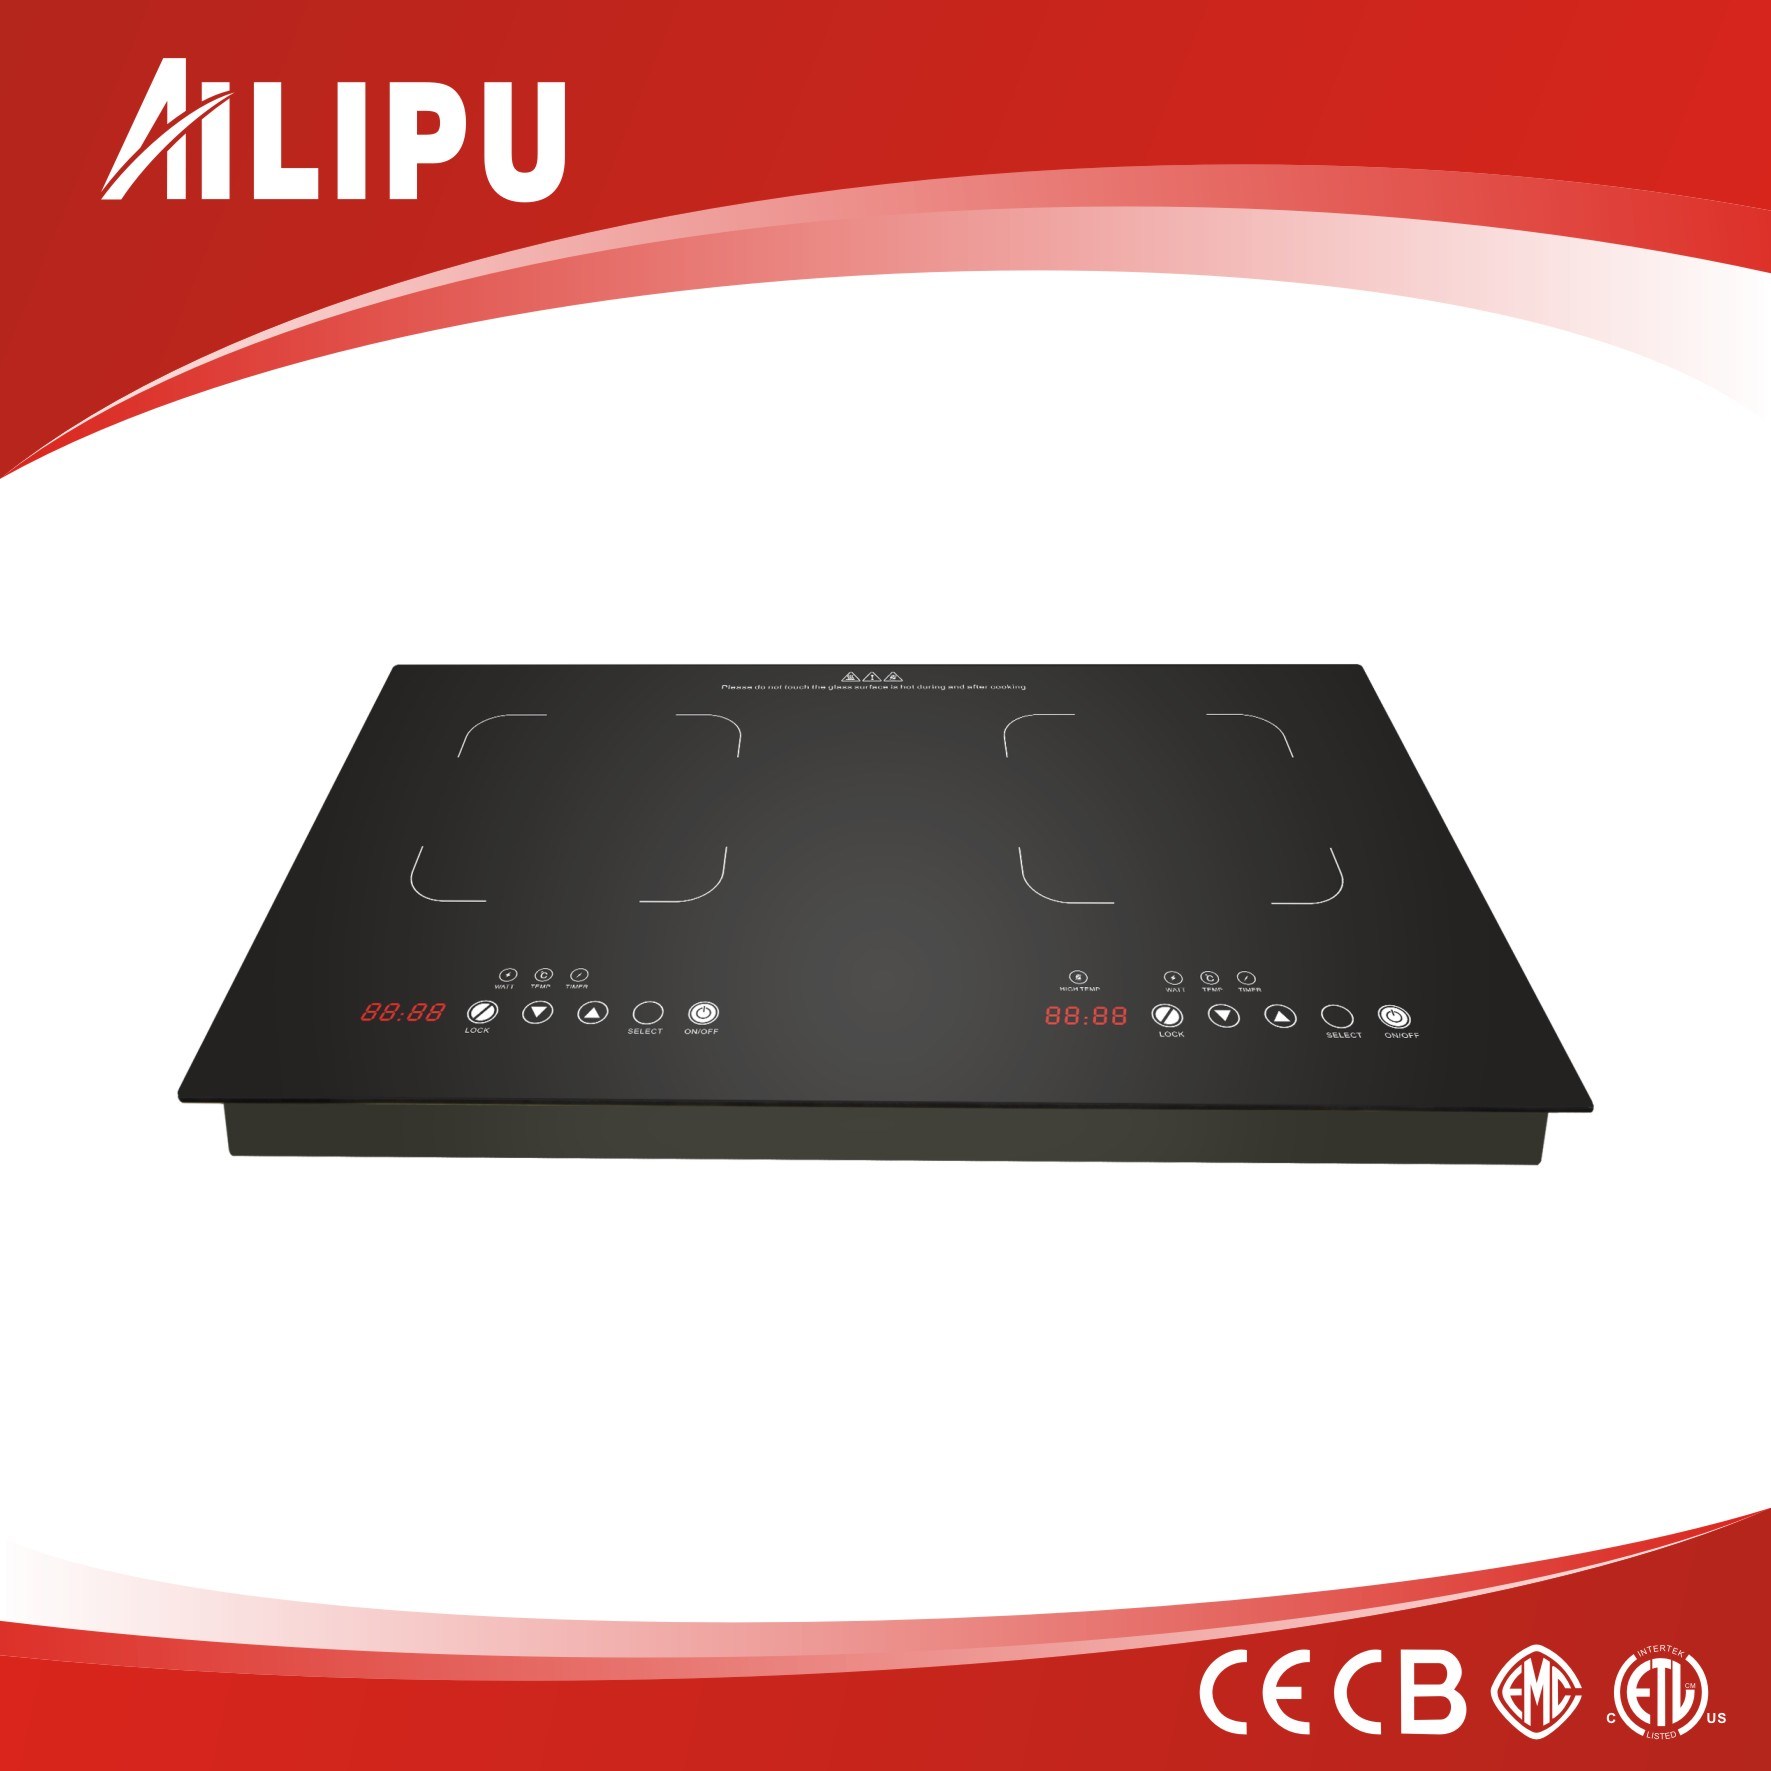 European Technology Double Burners Induction Cooker Model Sm-Dic13b2